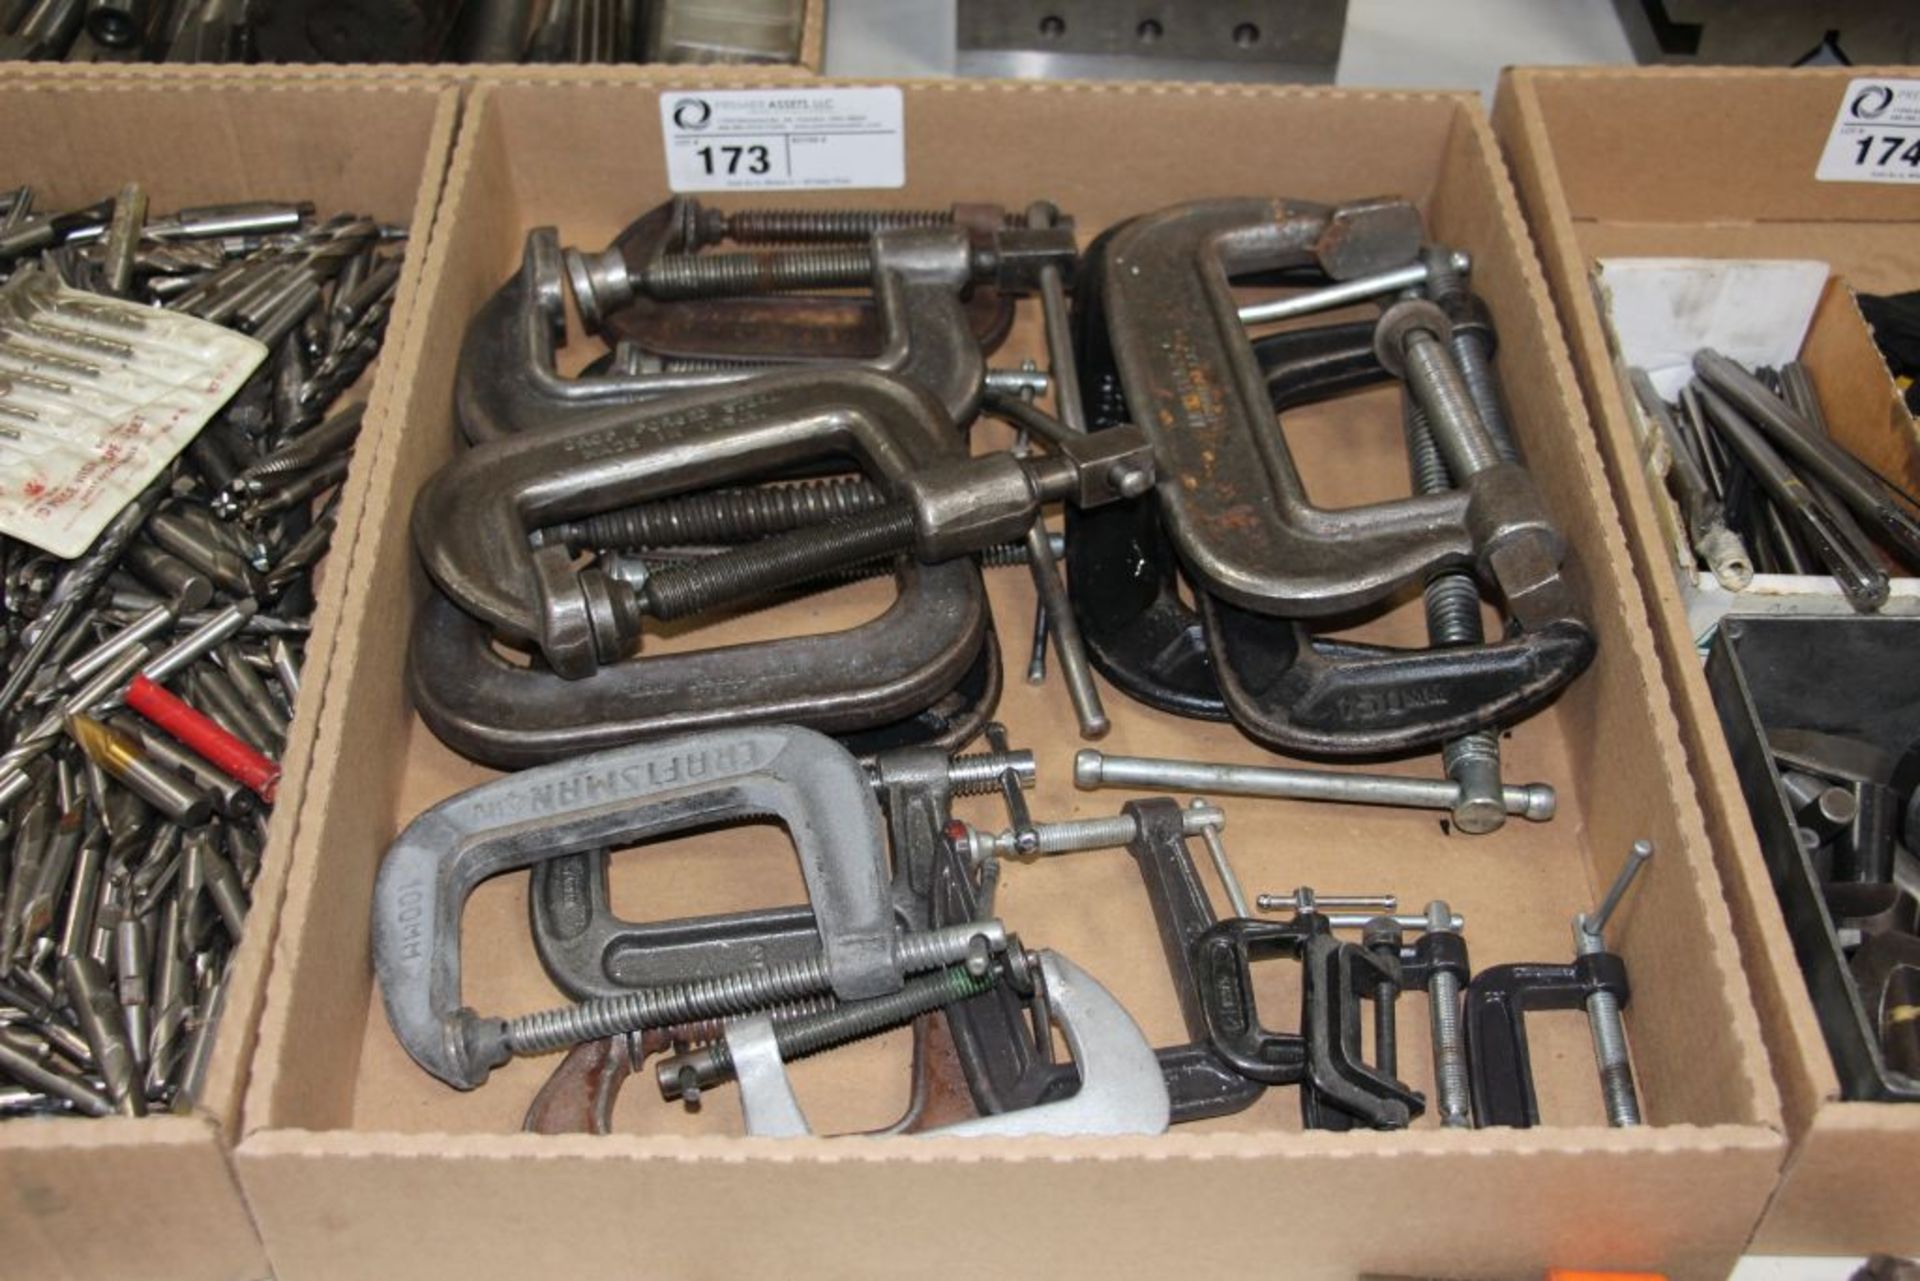 Assortment of C-clamps, various sizes 1-8"